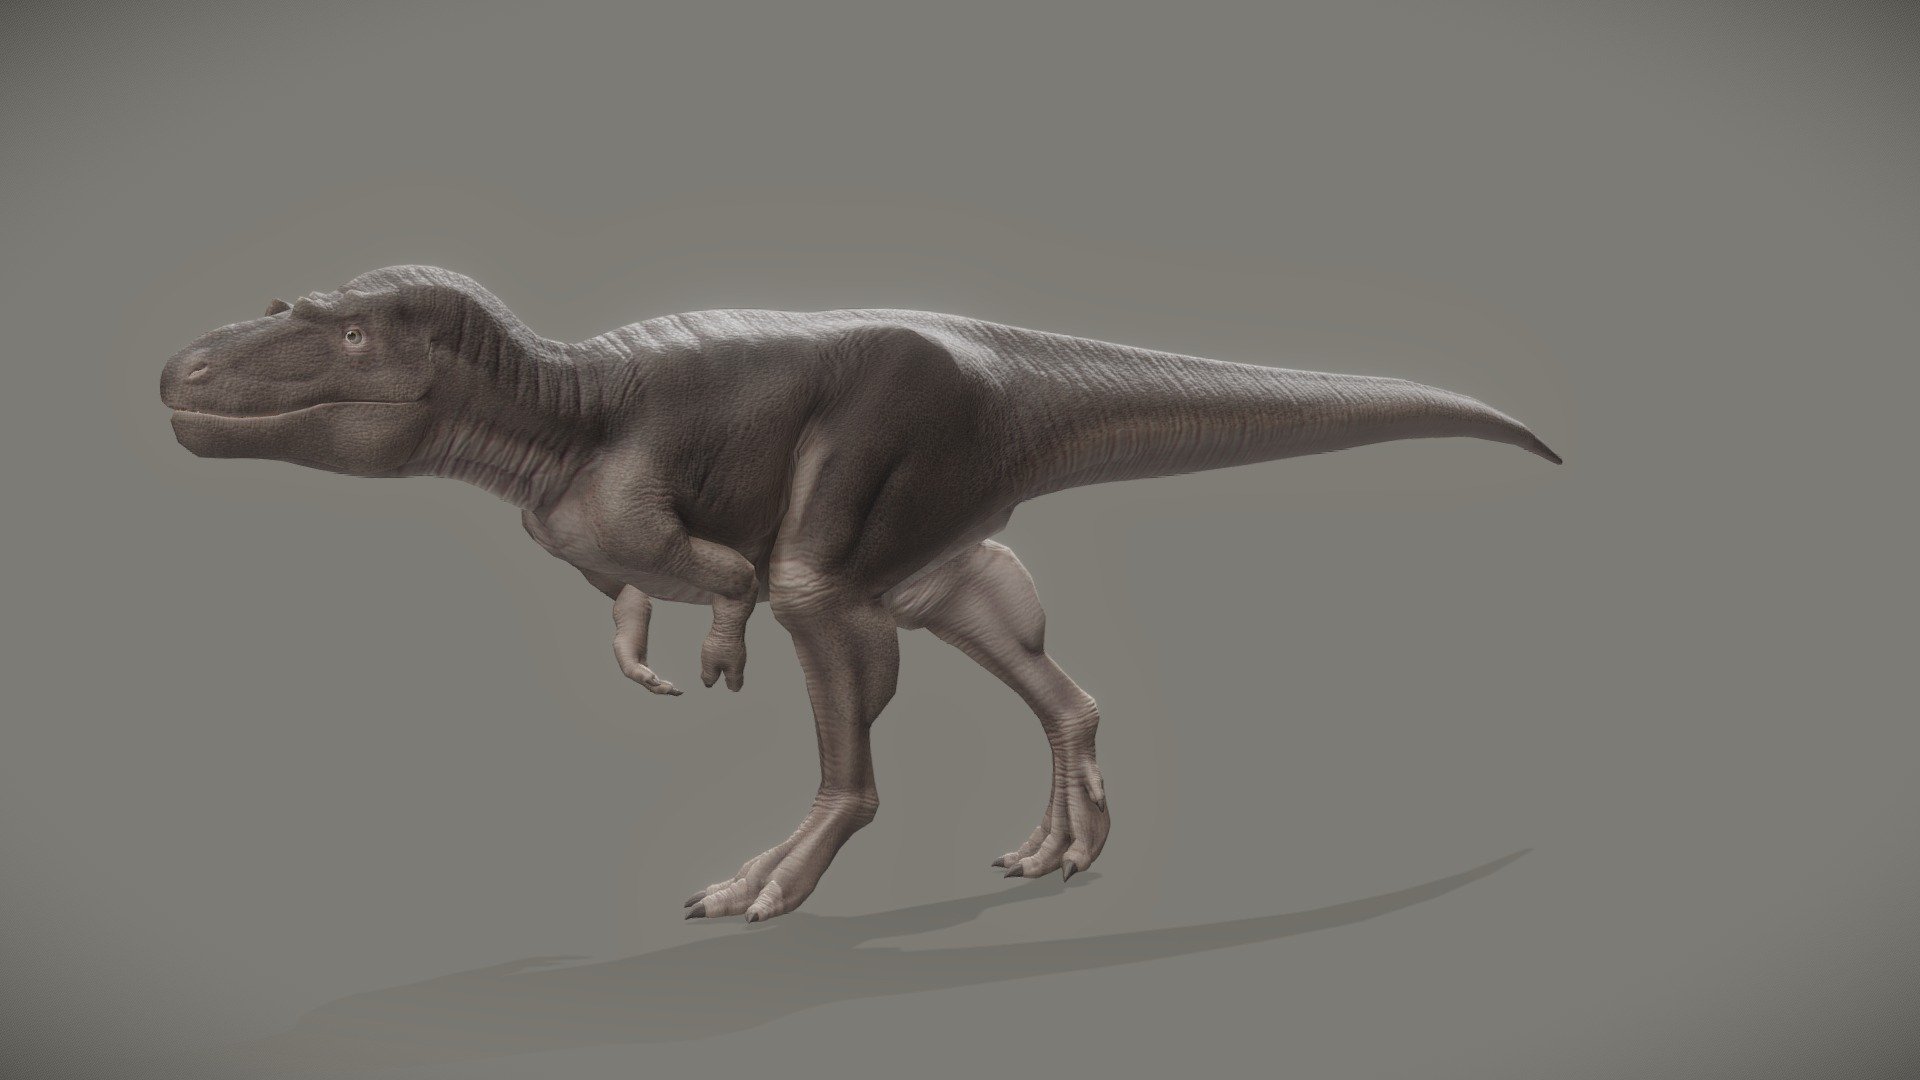 An animated Daspletosaurus Torosus, a creature of the late Cretaceous period, I've made with Blender.

– For more dinosaurs, don't hesitate to take a look at my Prehistoric Animals collection and subscribe to it to stay tuned of new creatures. –

-&gt; Another Tyrannosaurids in this collection.

-&gt; The Daspletosaurus in a diorama 3d model